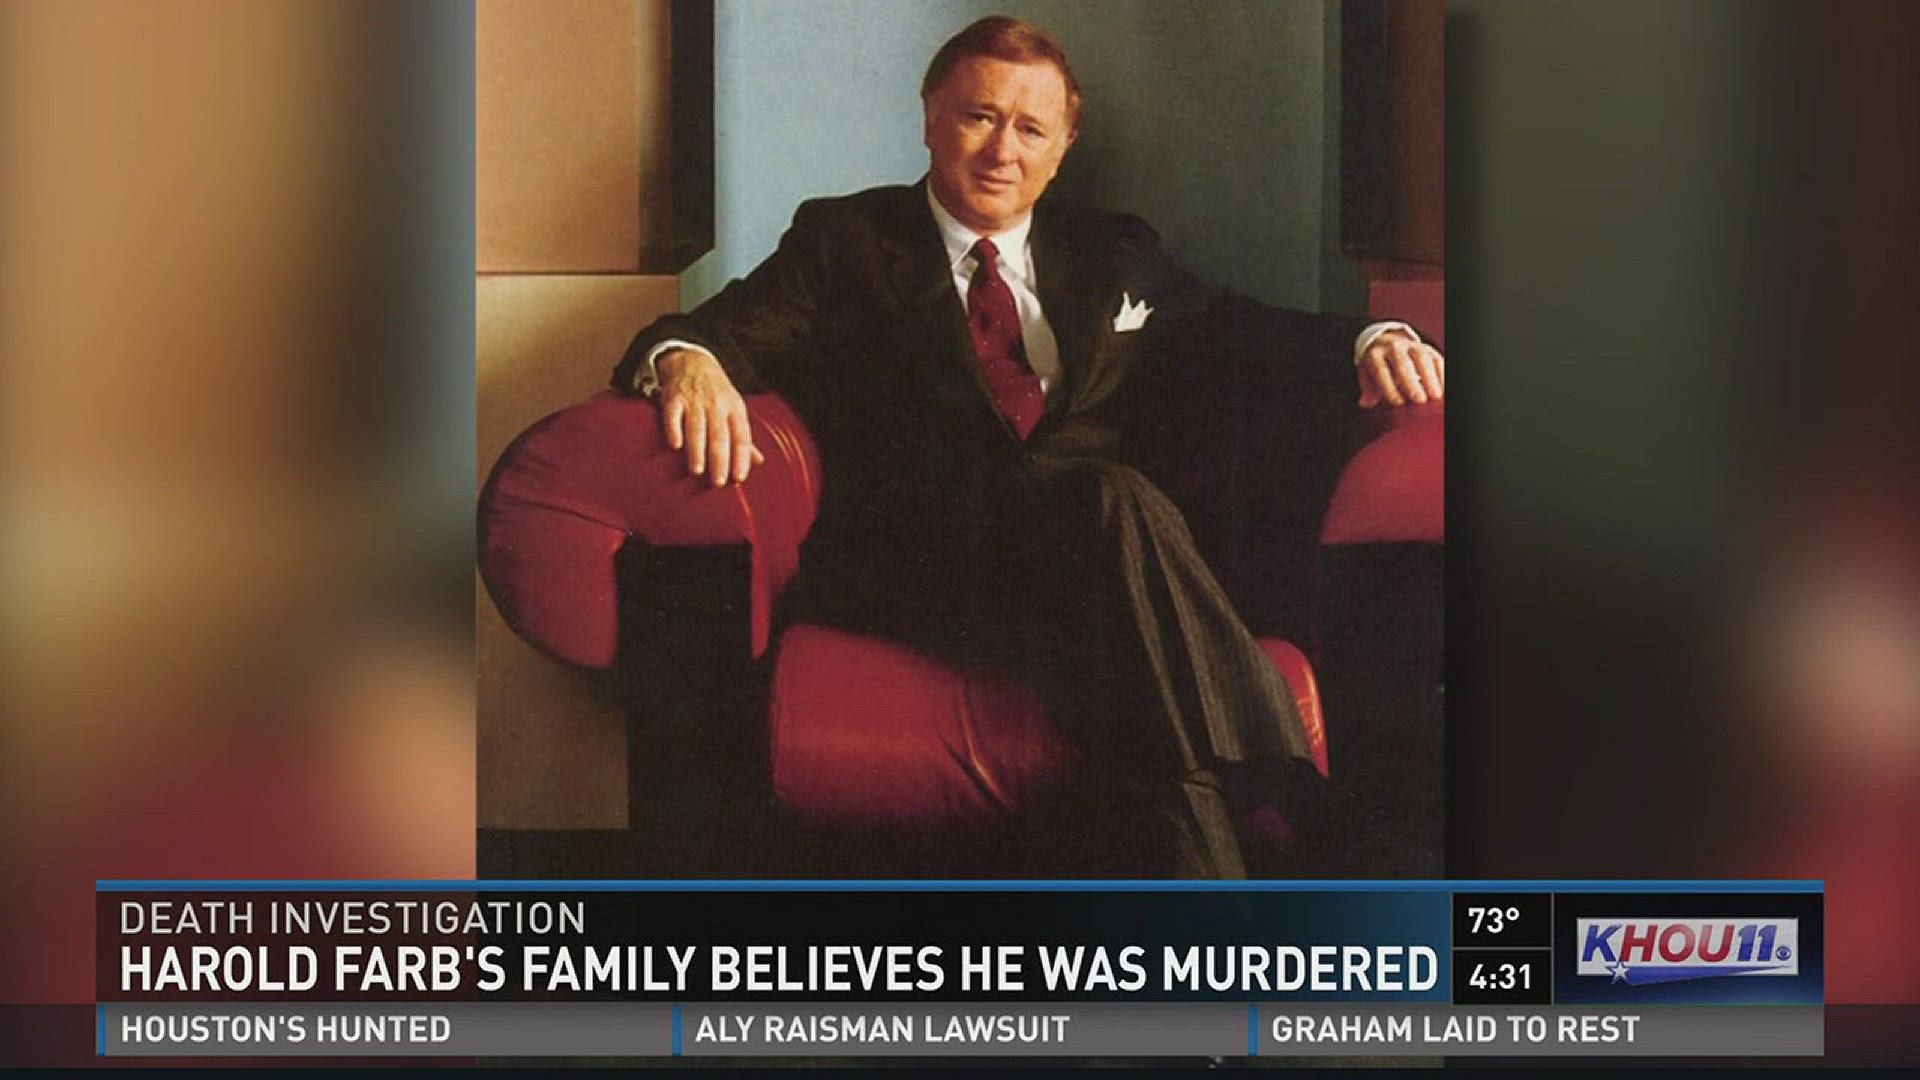 The family of a legendary Houston developer is demanding justice more than a decade after his death.